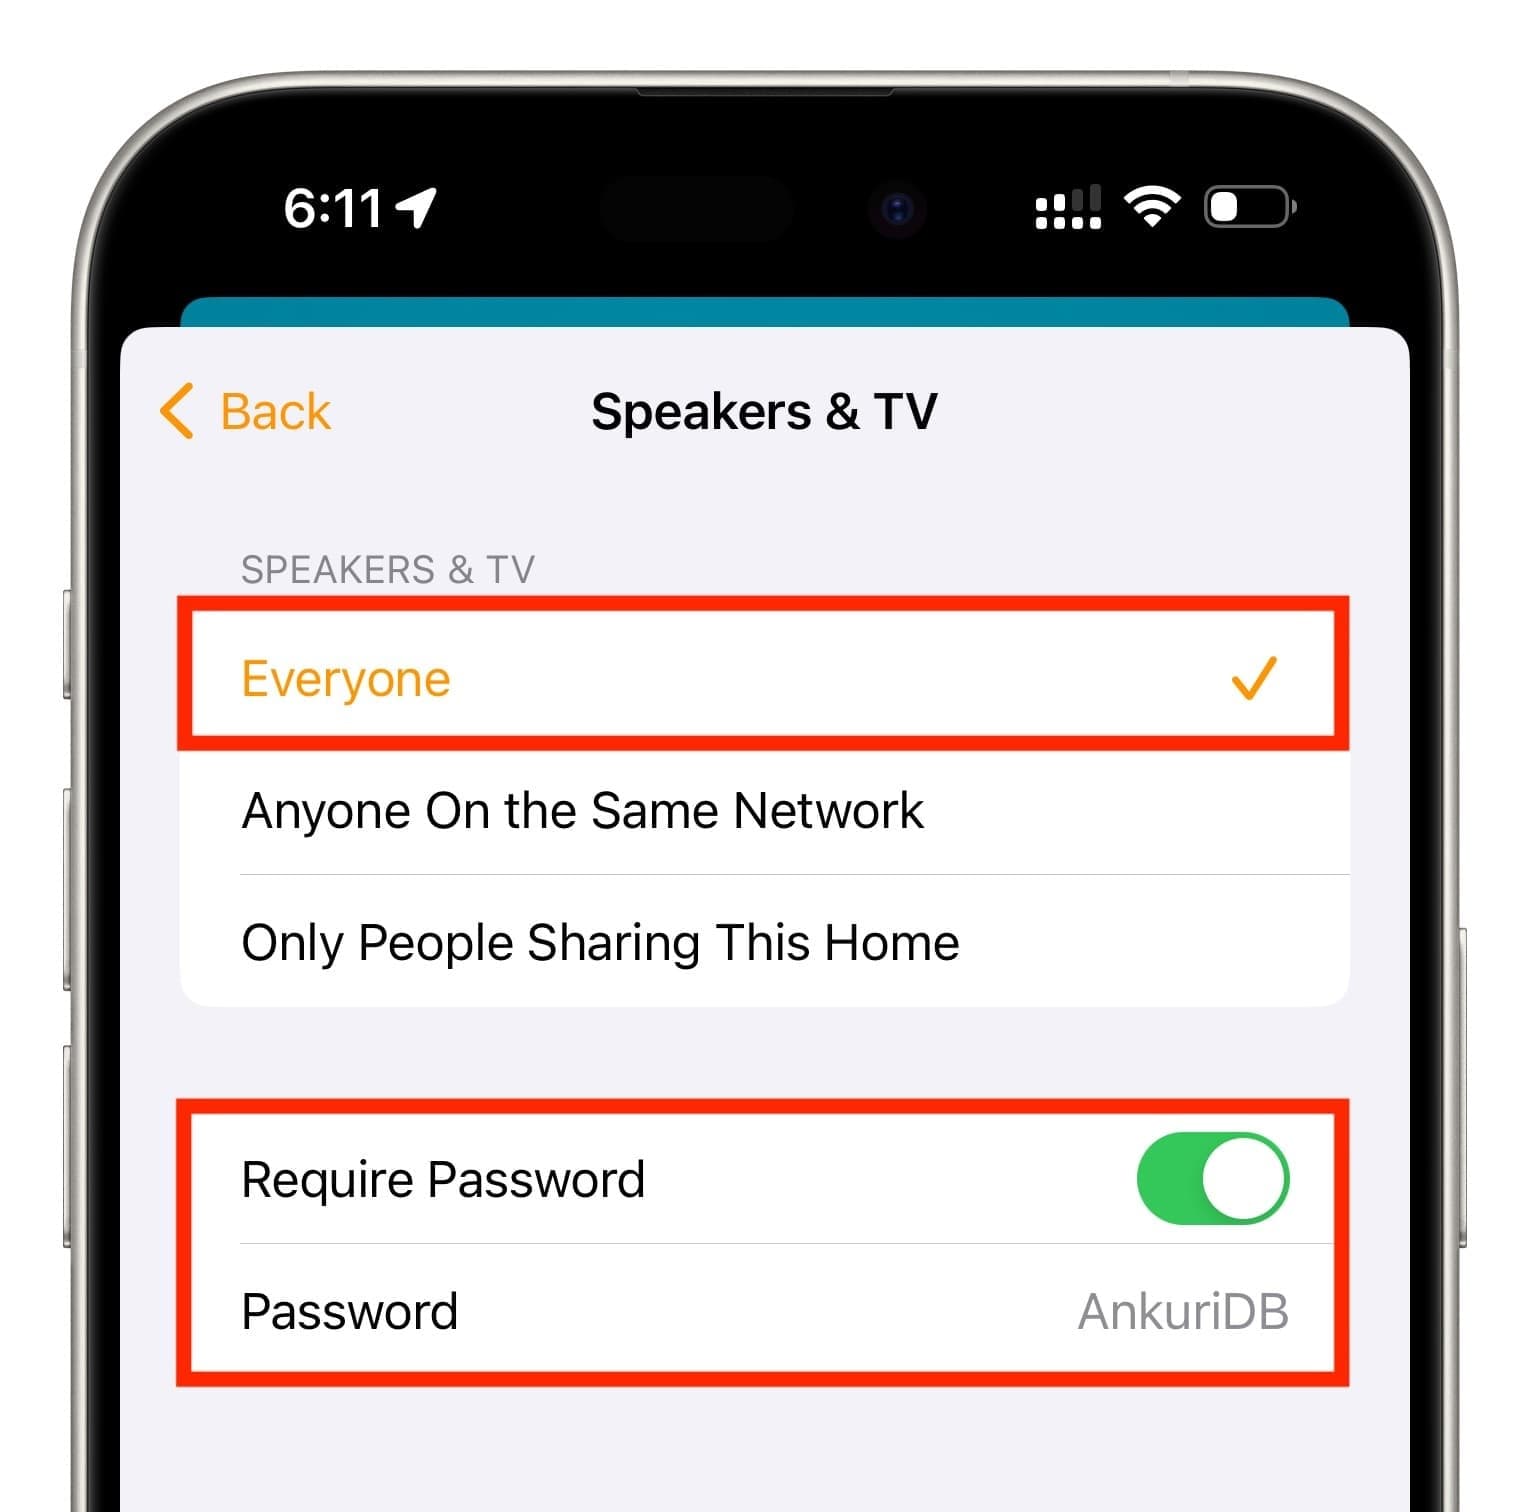 Set HomePod AirPlay to Everyone in iPhone Home app